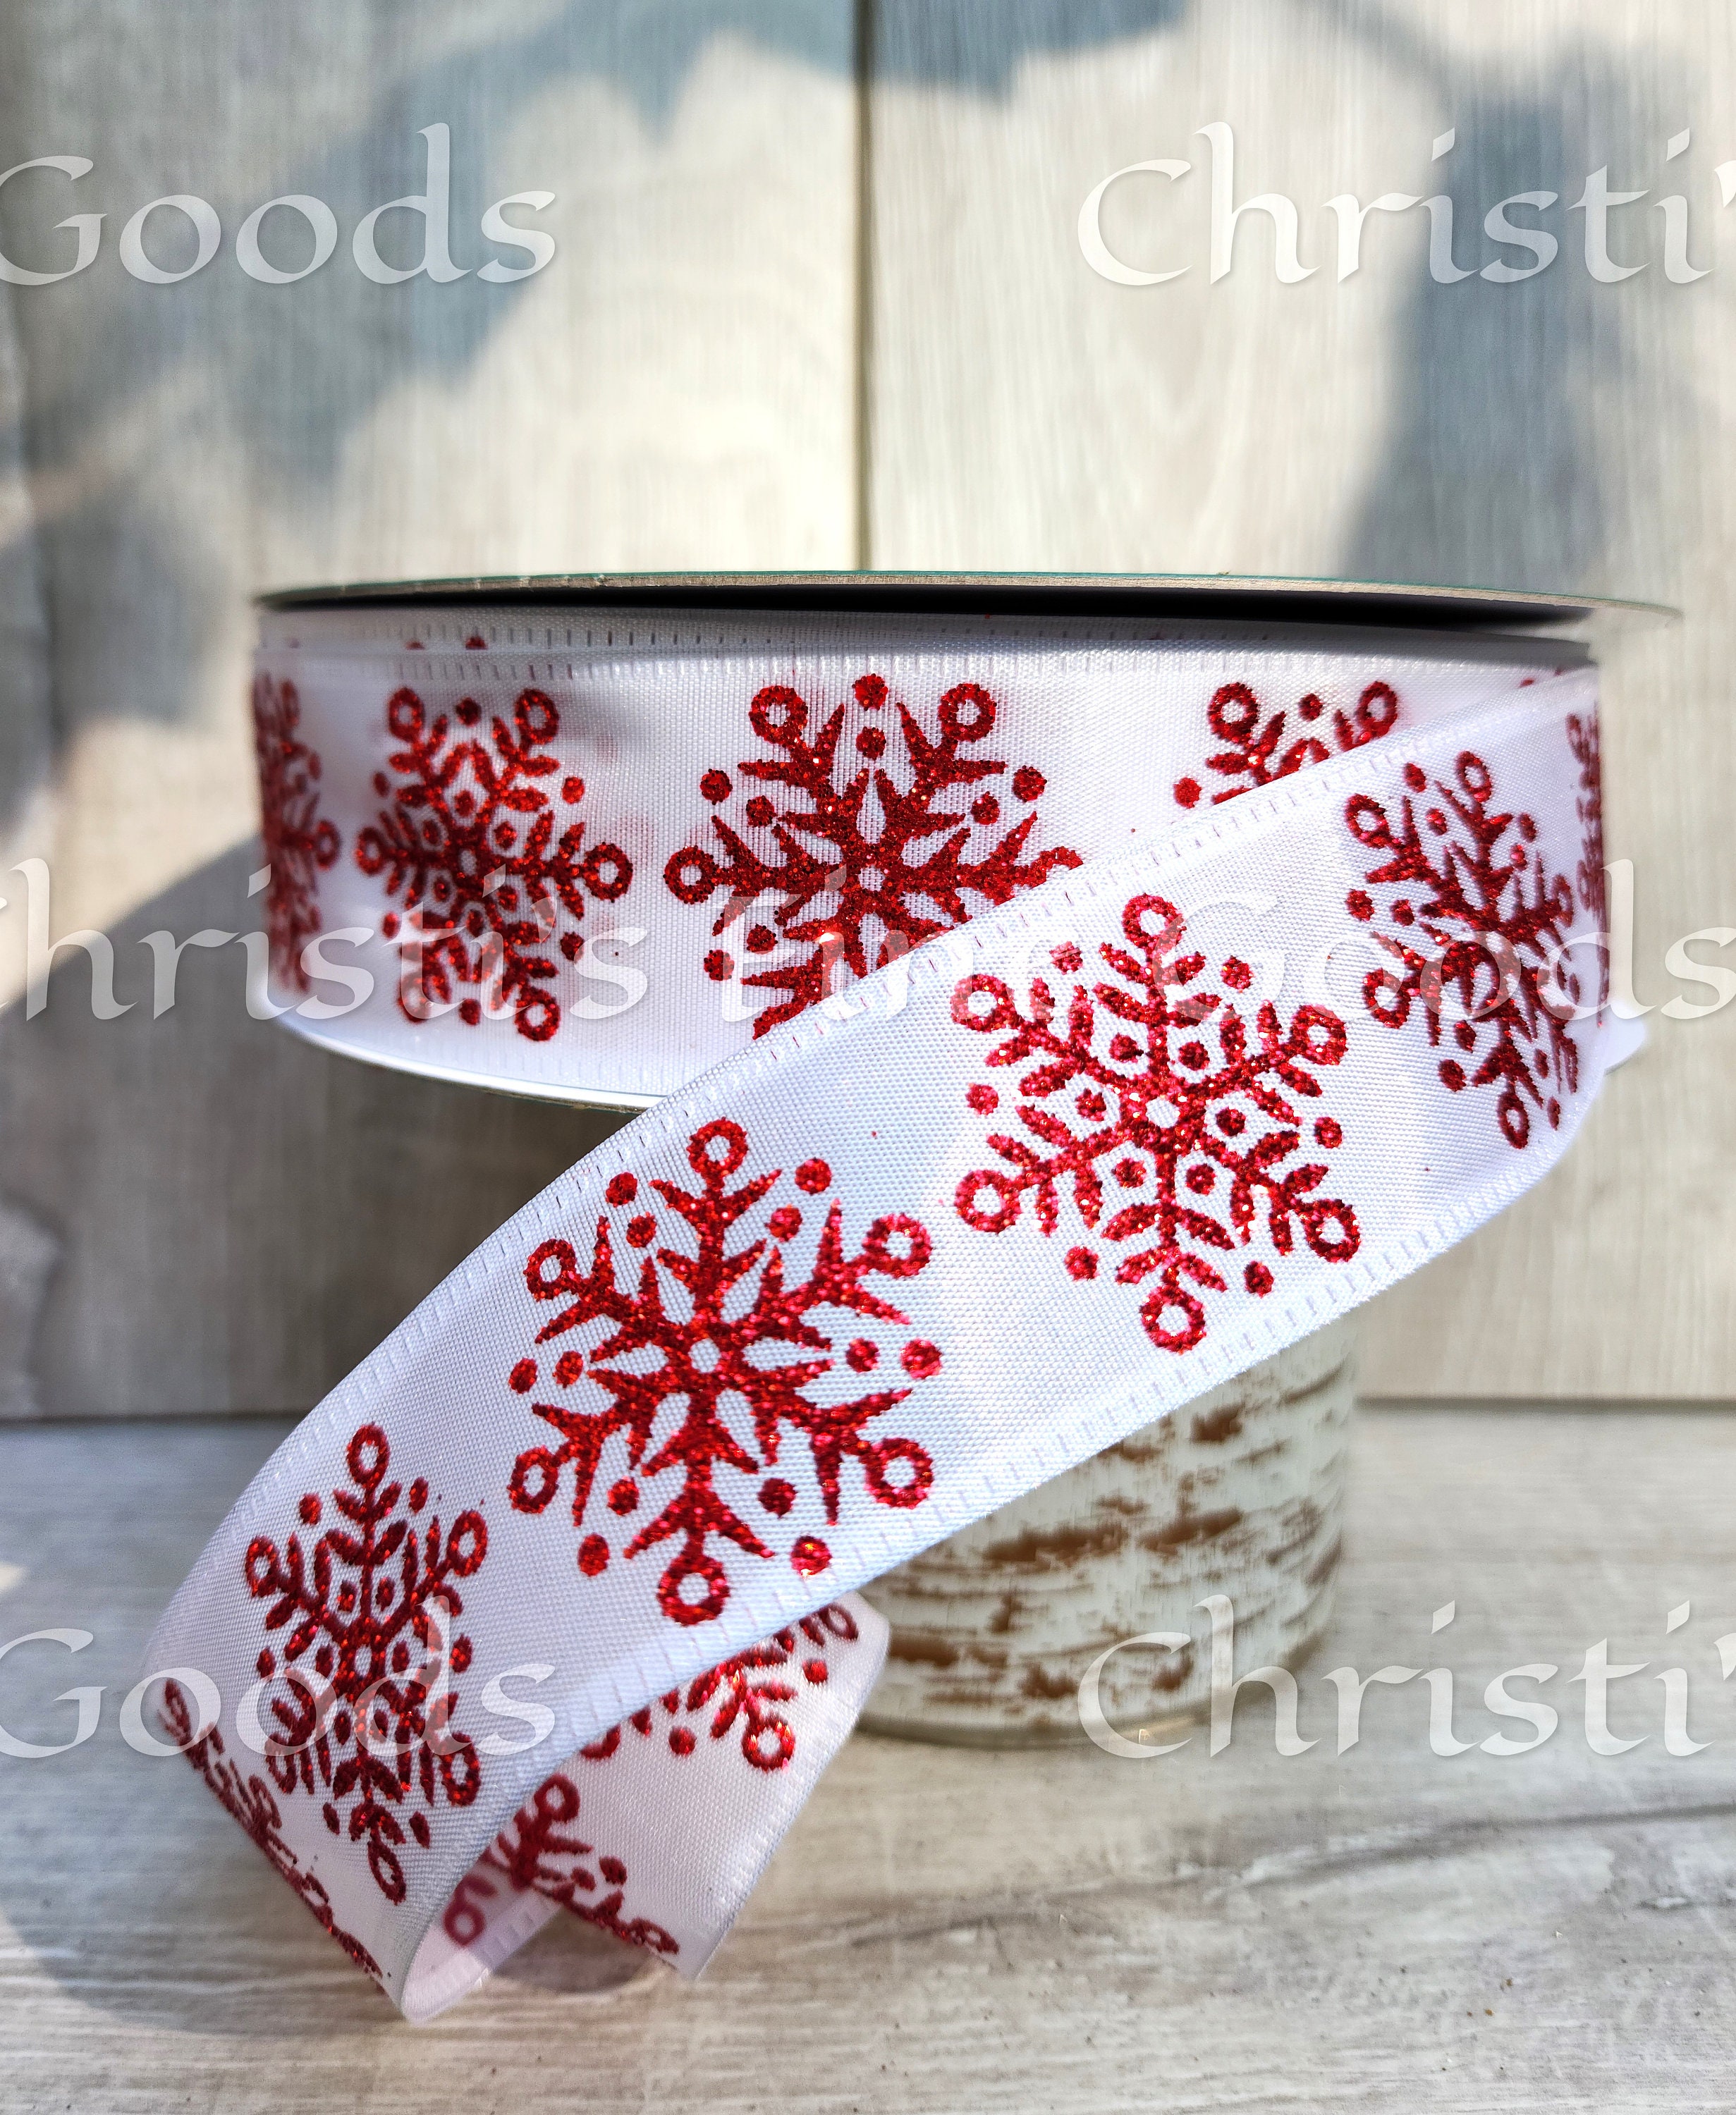 1.5 inch White Satin with Gold and Silver Snowflake Ribbon